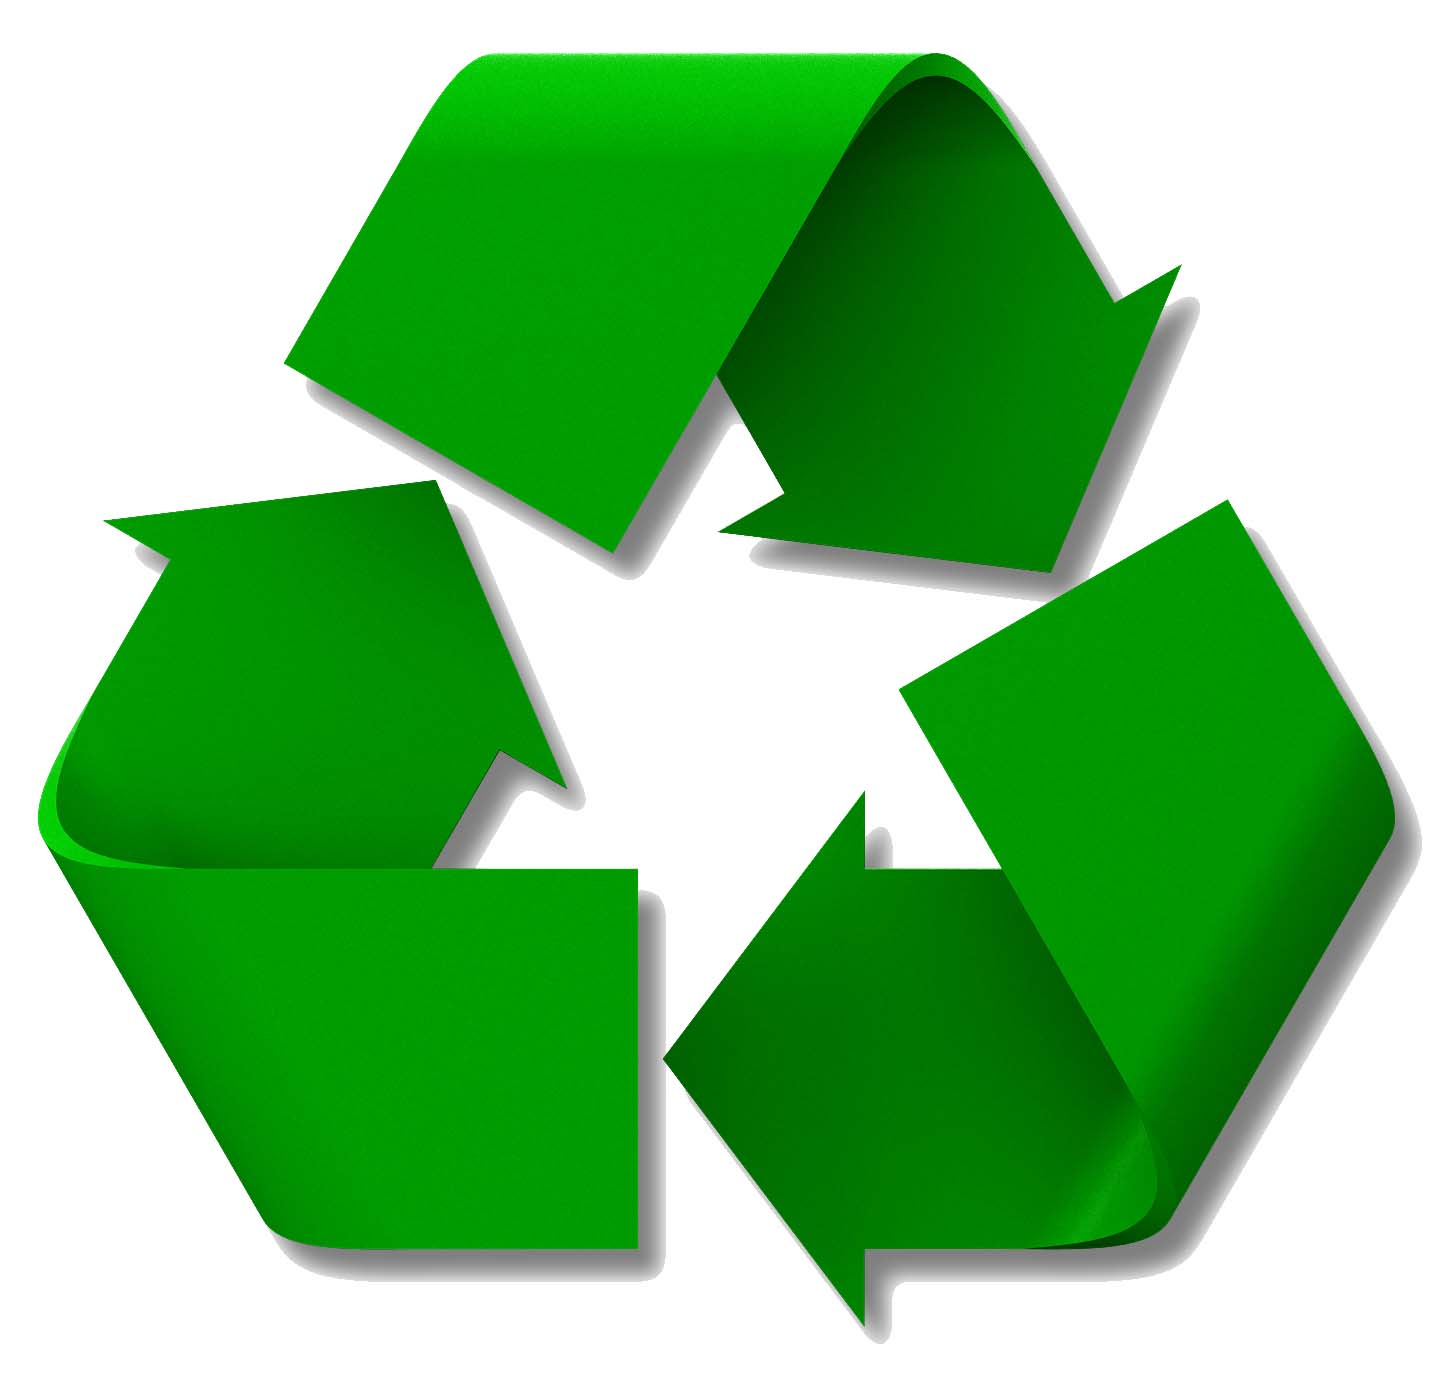 Increase the Recycling Rate